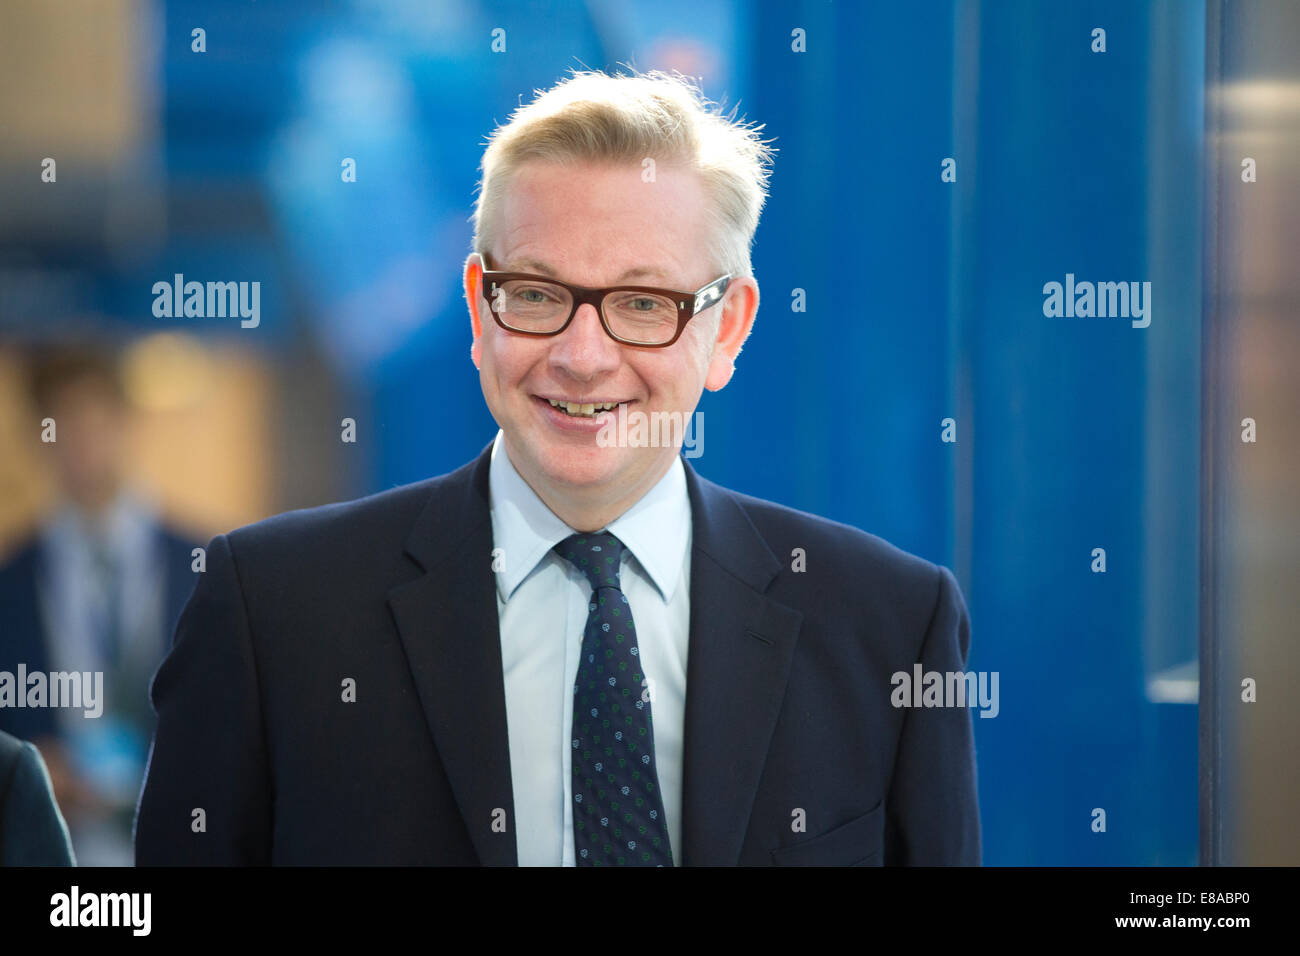 The Rt Hon Michael Gove MP, Commons Chief Whip, Conservative MP for Surrey Heath, England, UK Stock Photo